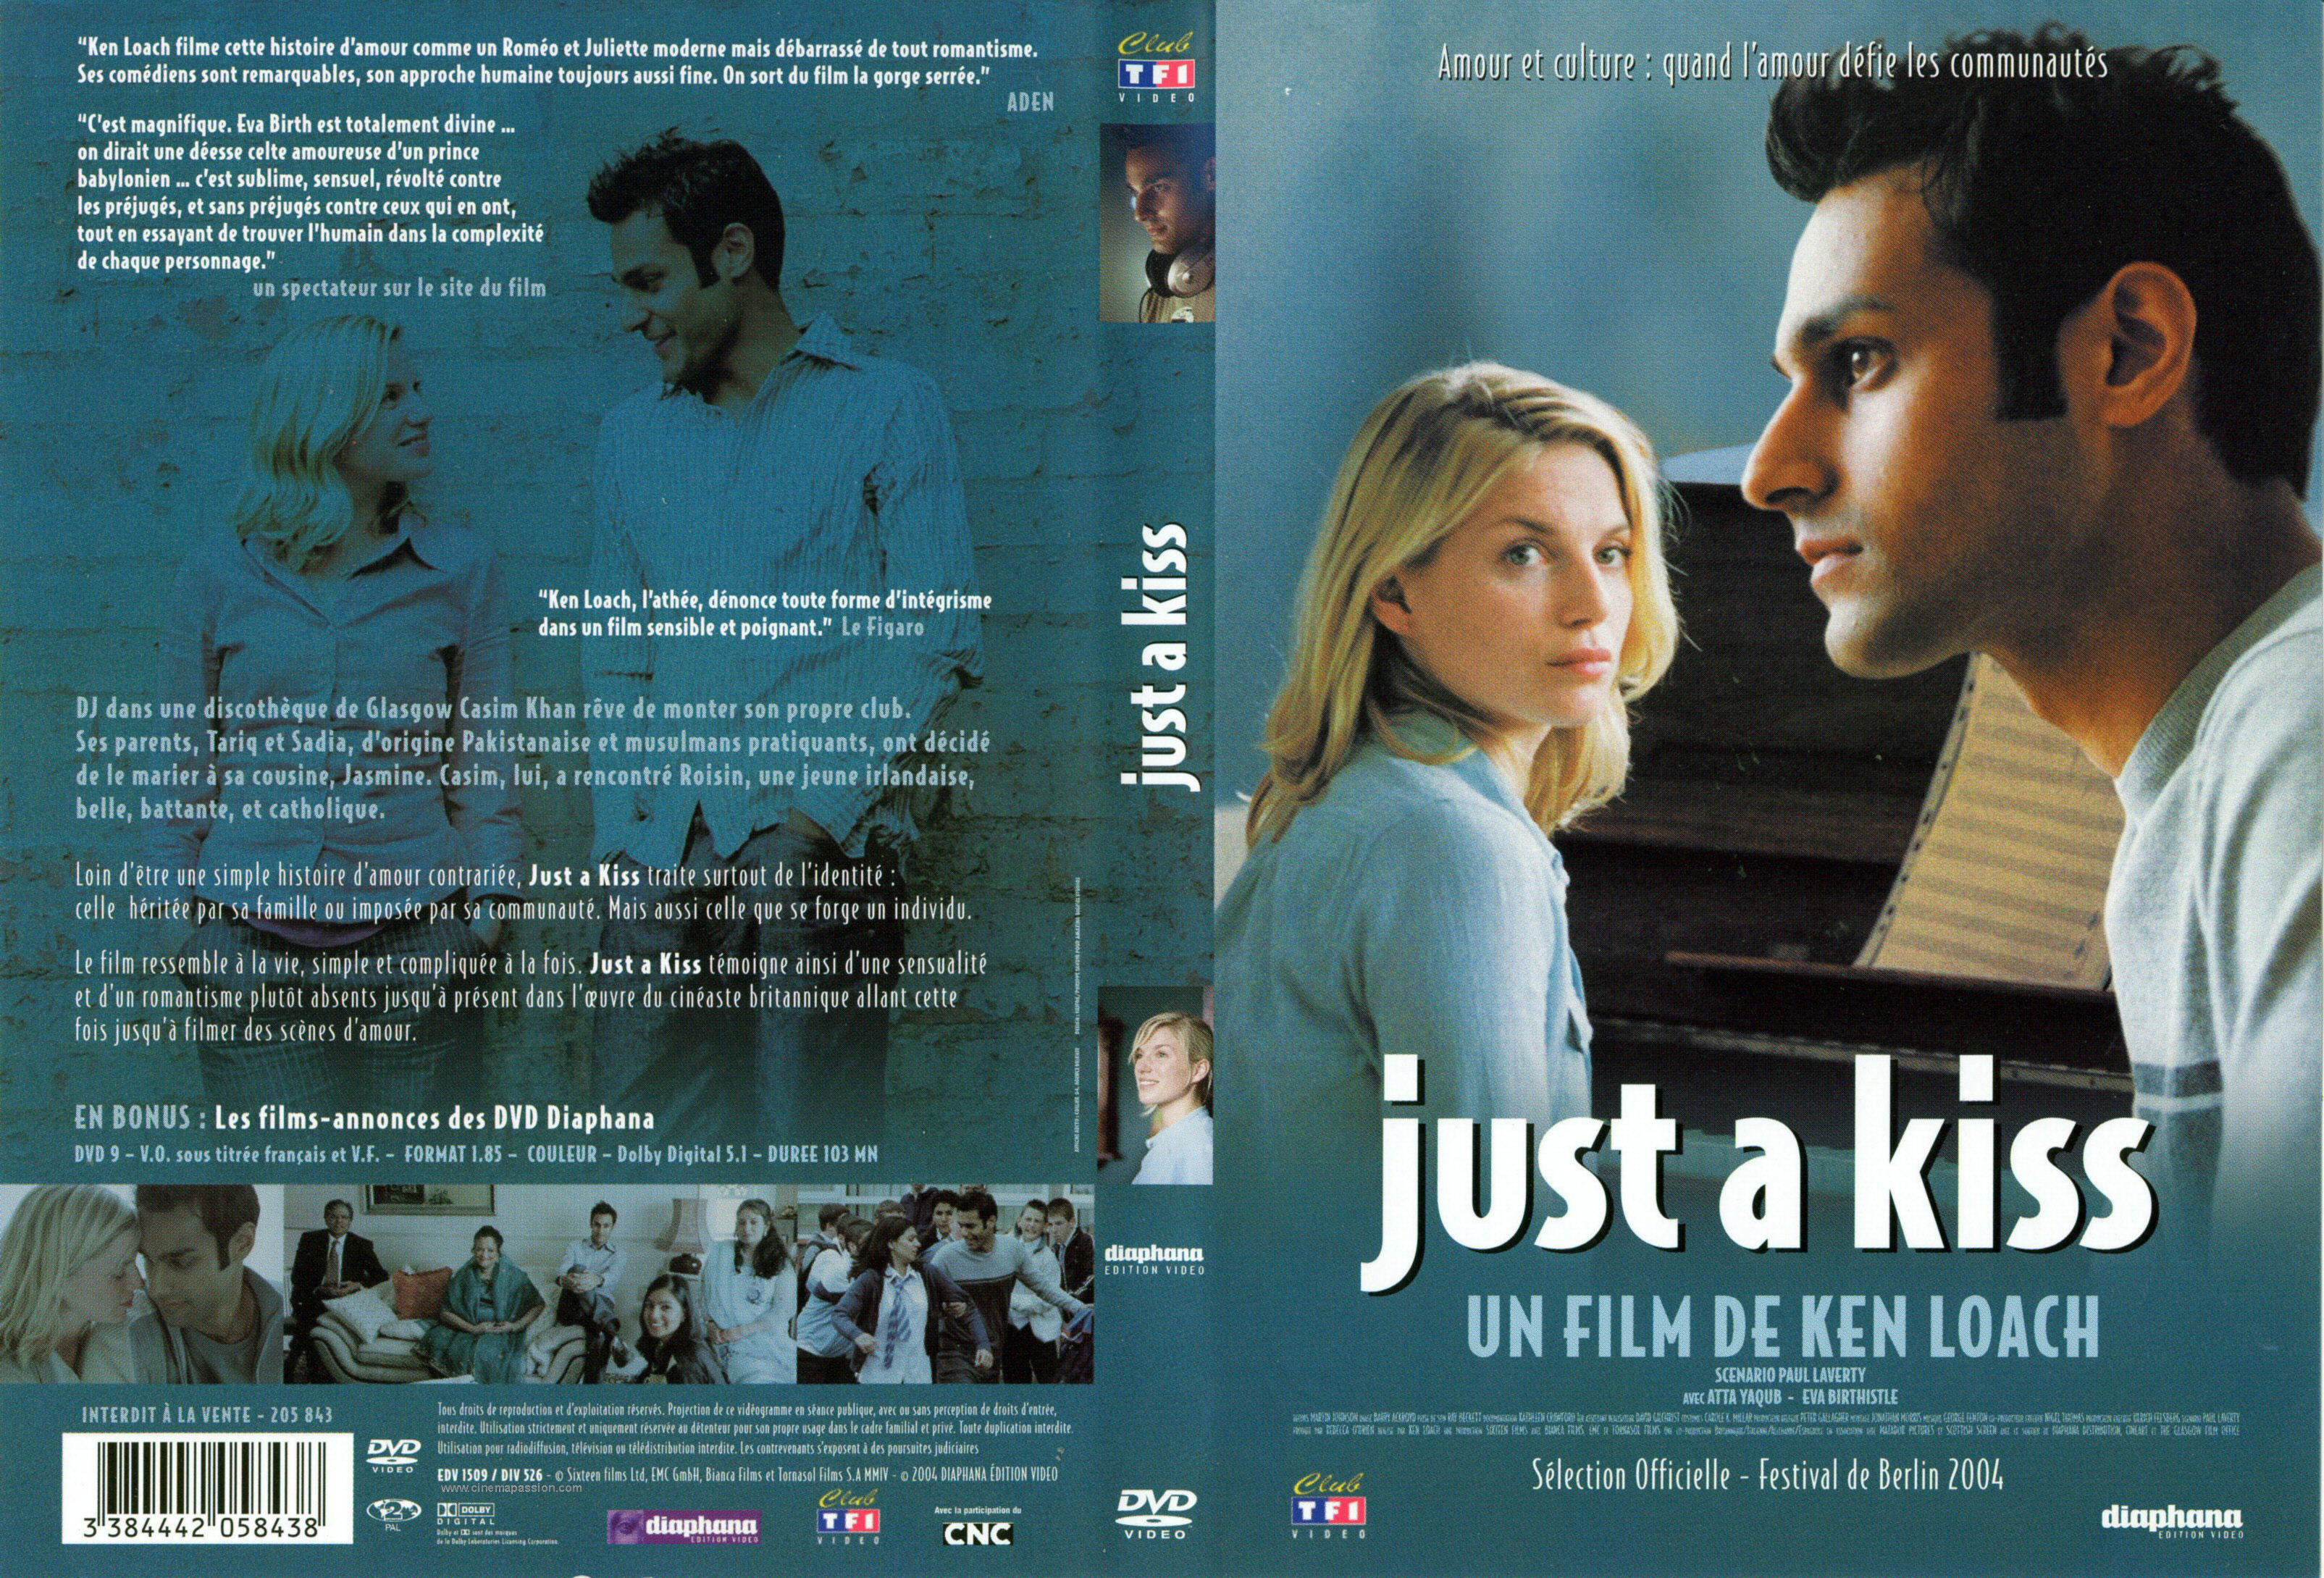 Jaquette DVD Just a kiss